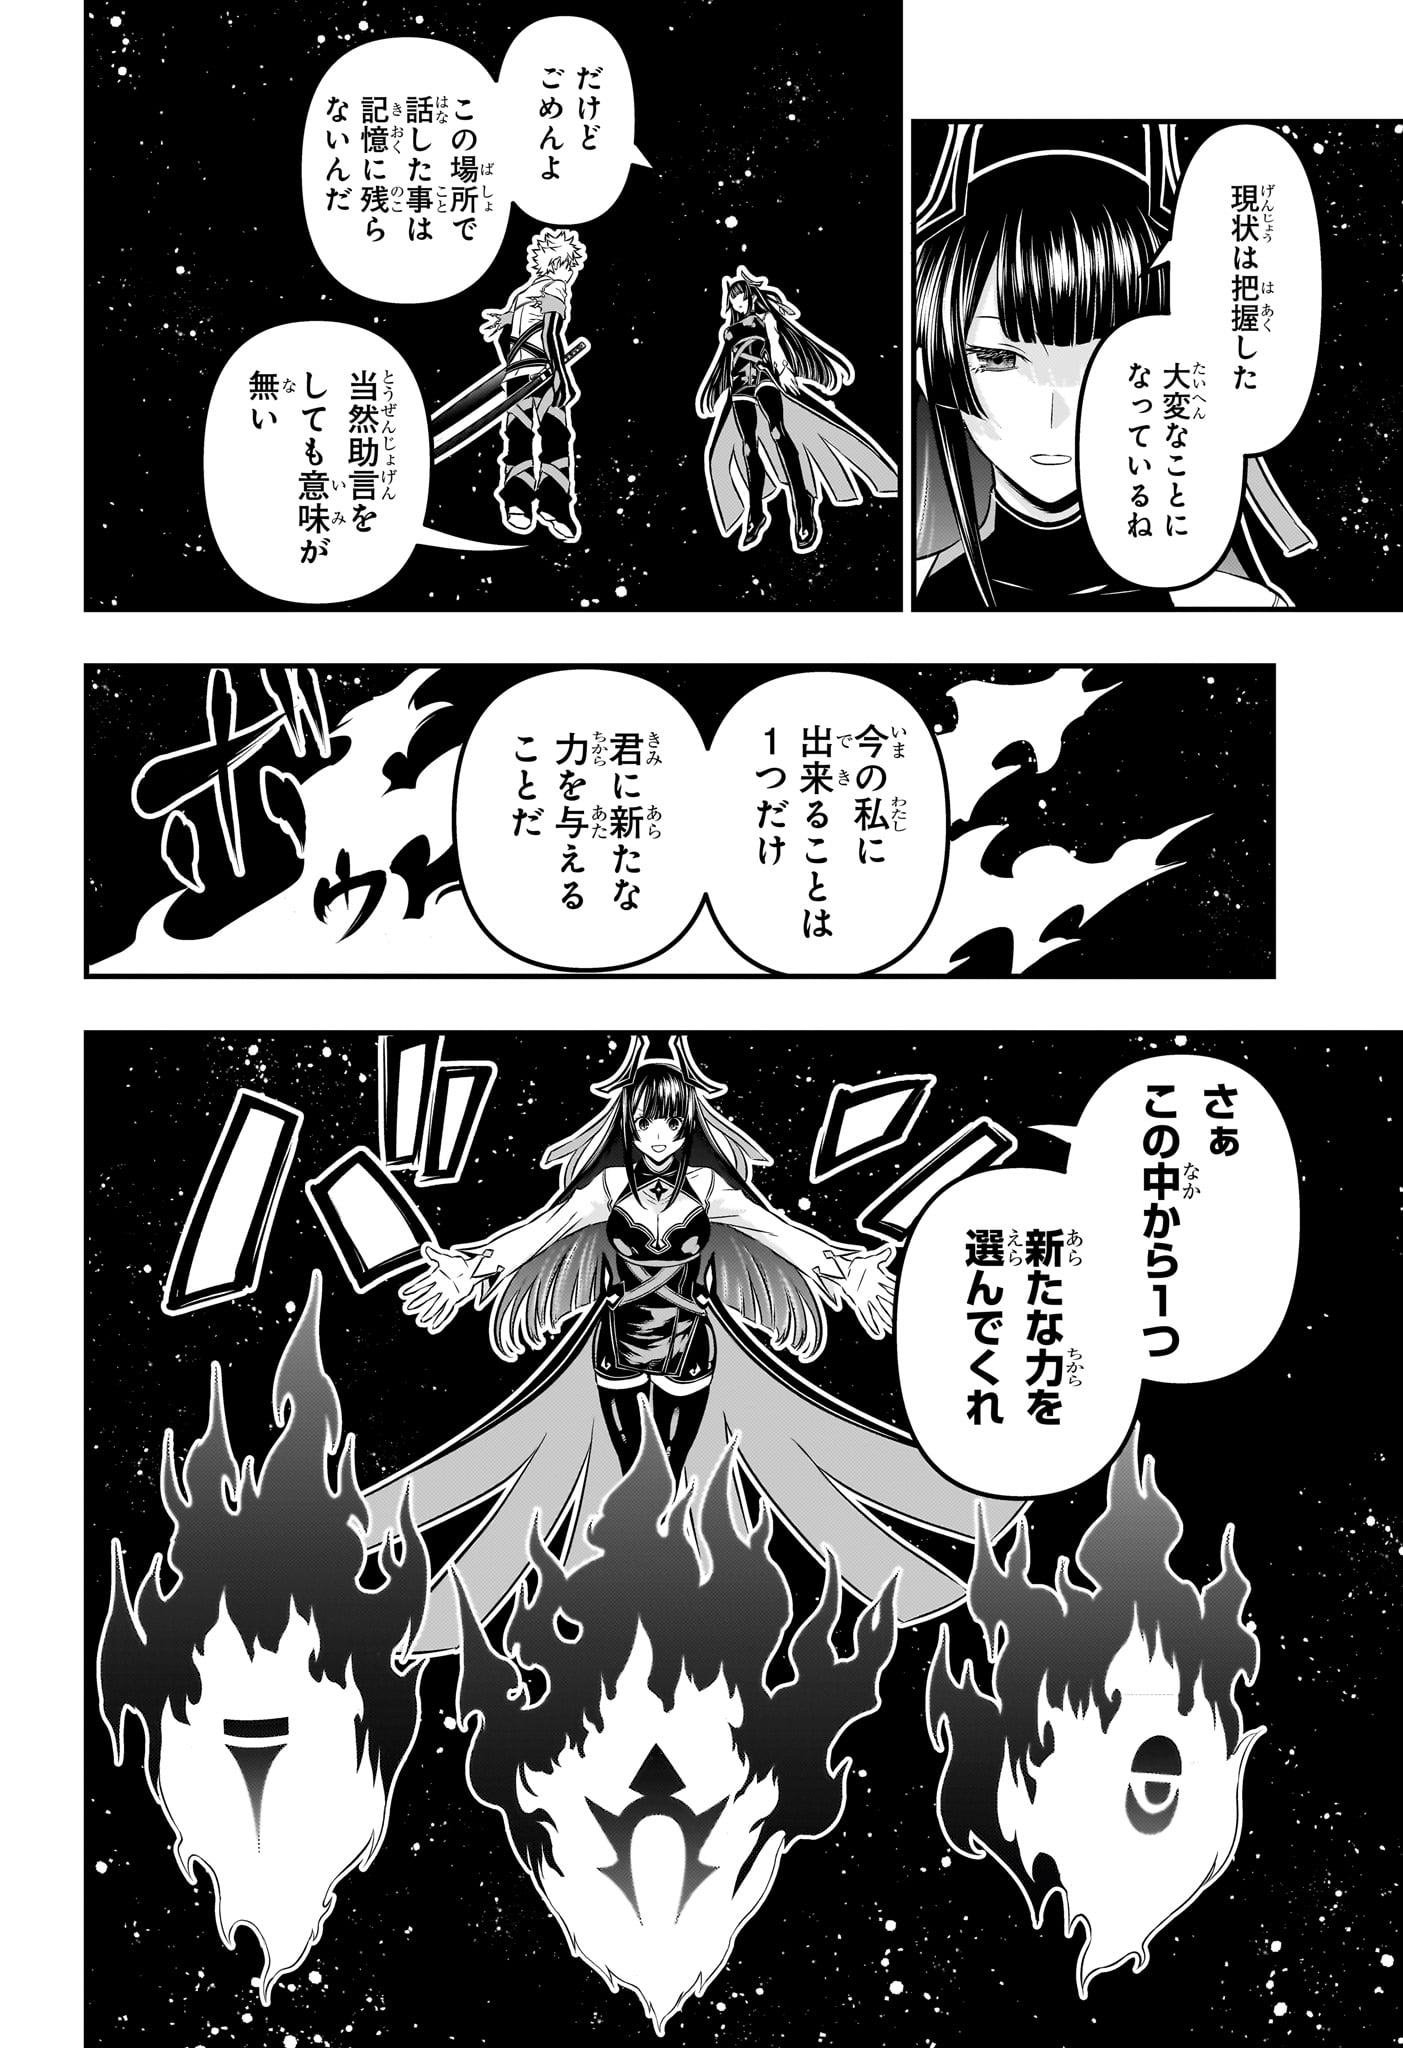 Nue no Onmyouji - Chapter 39 - Page 2